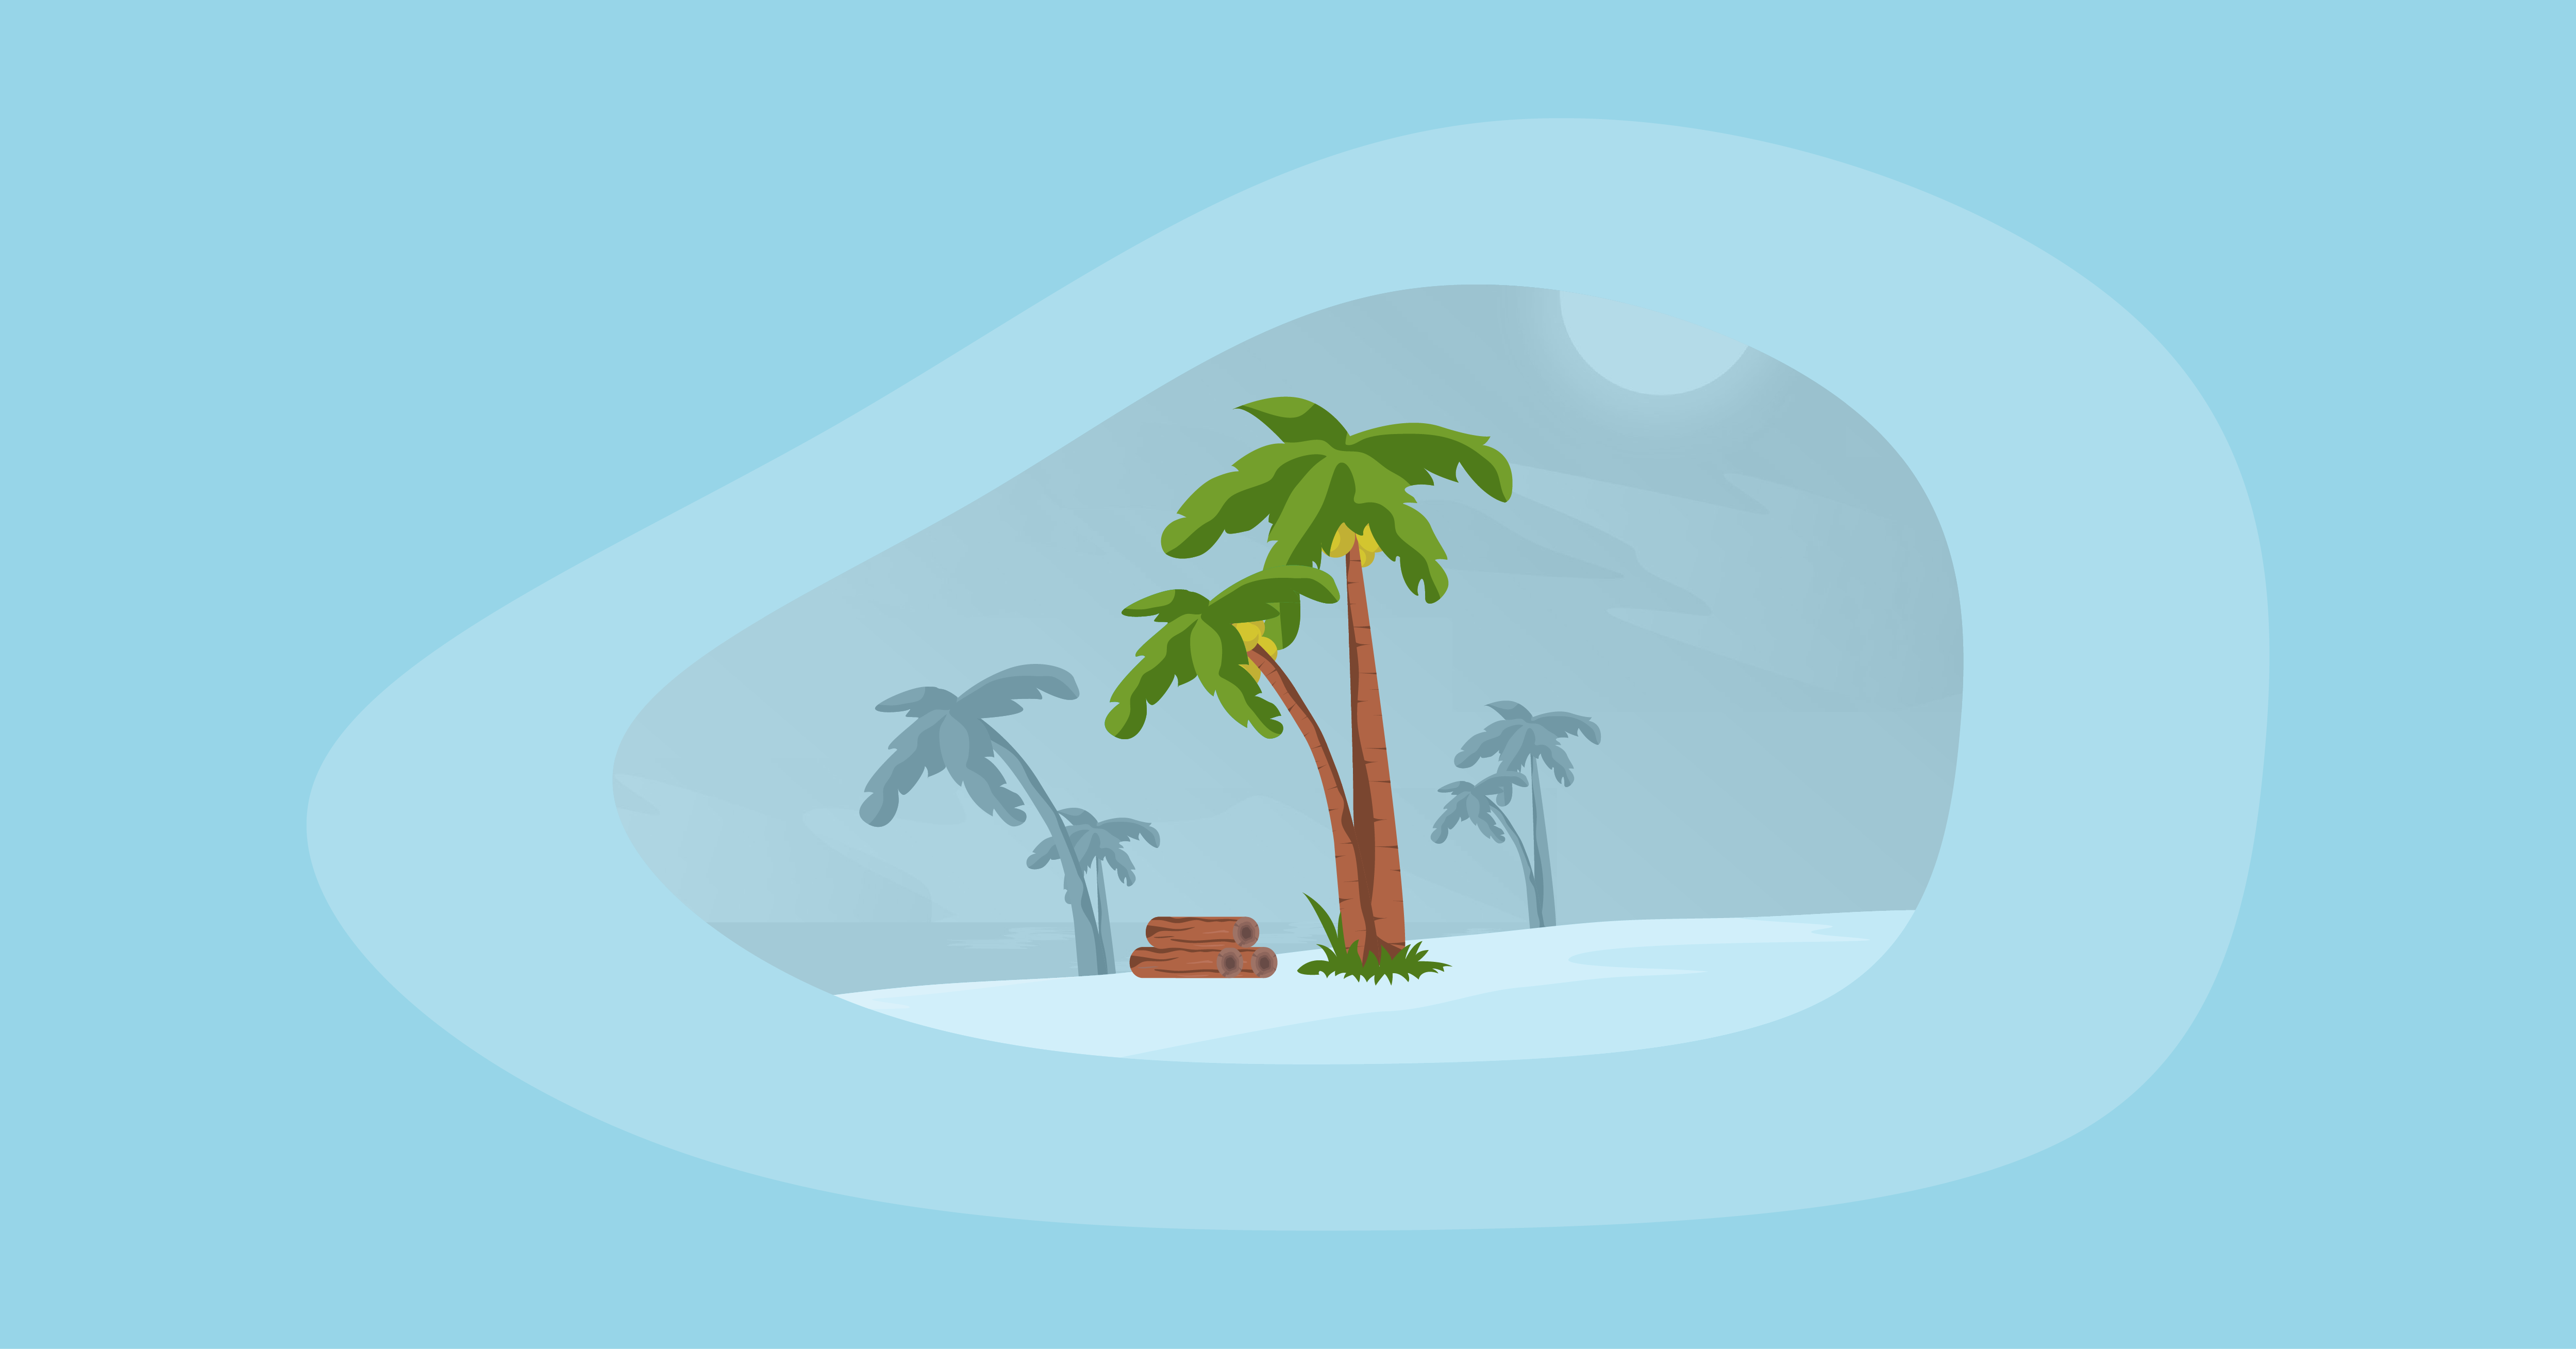 Illustration of a coconut tree and wood